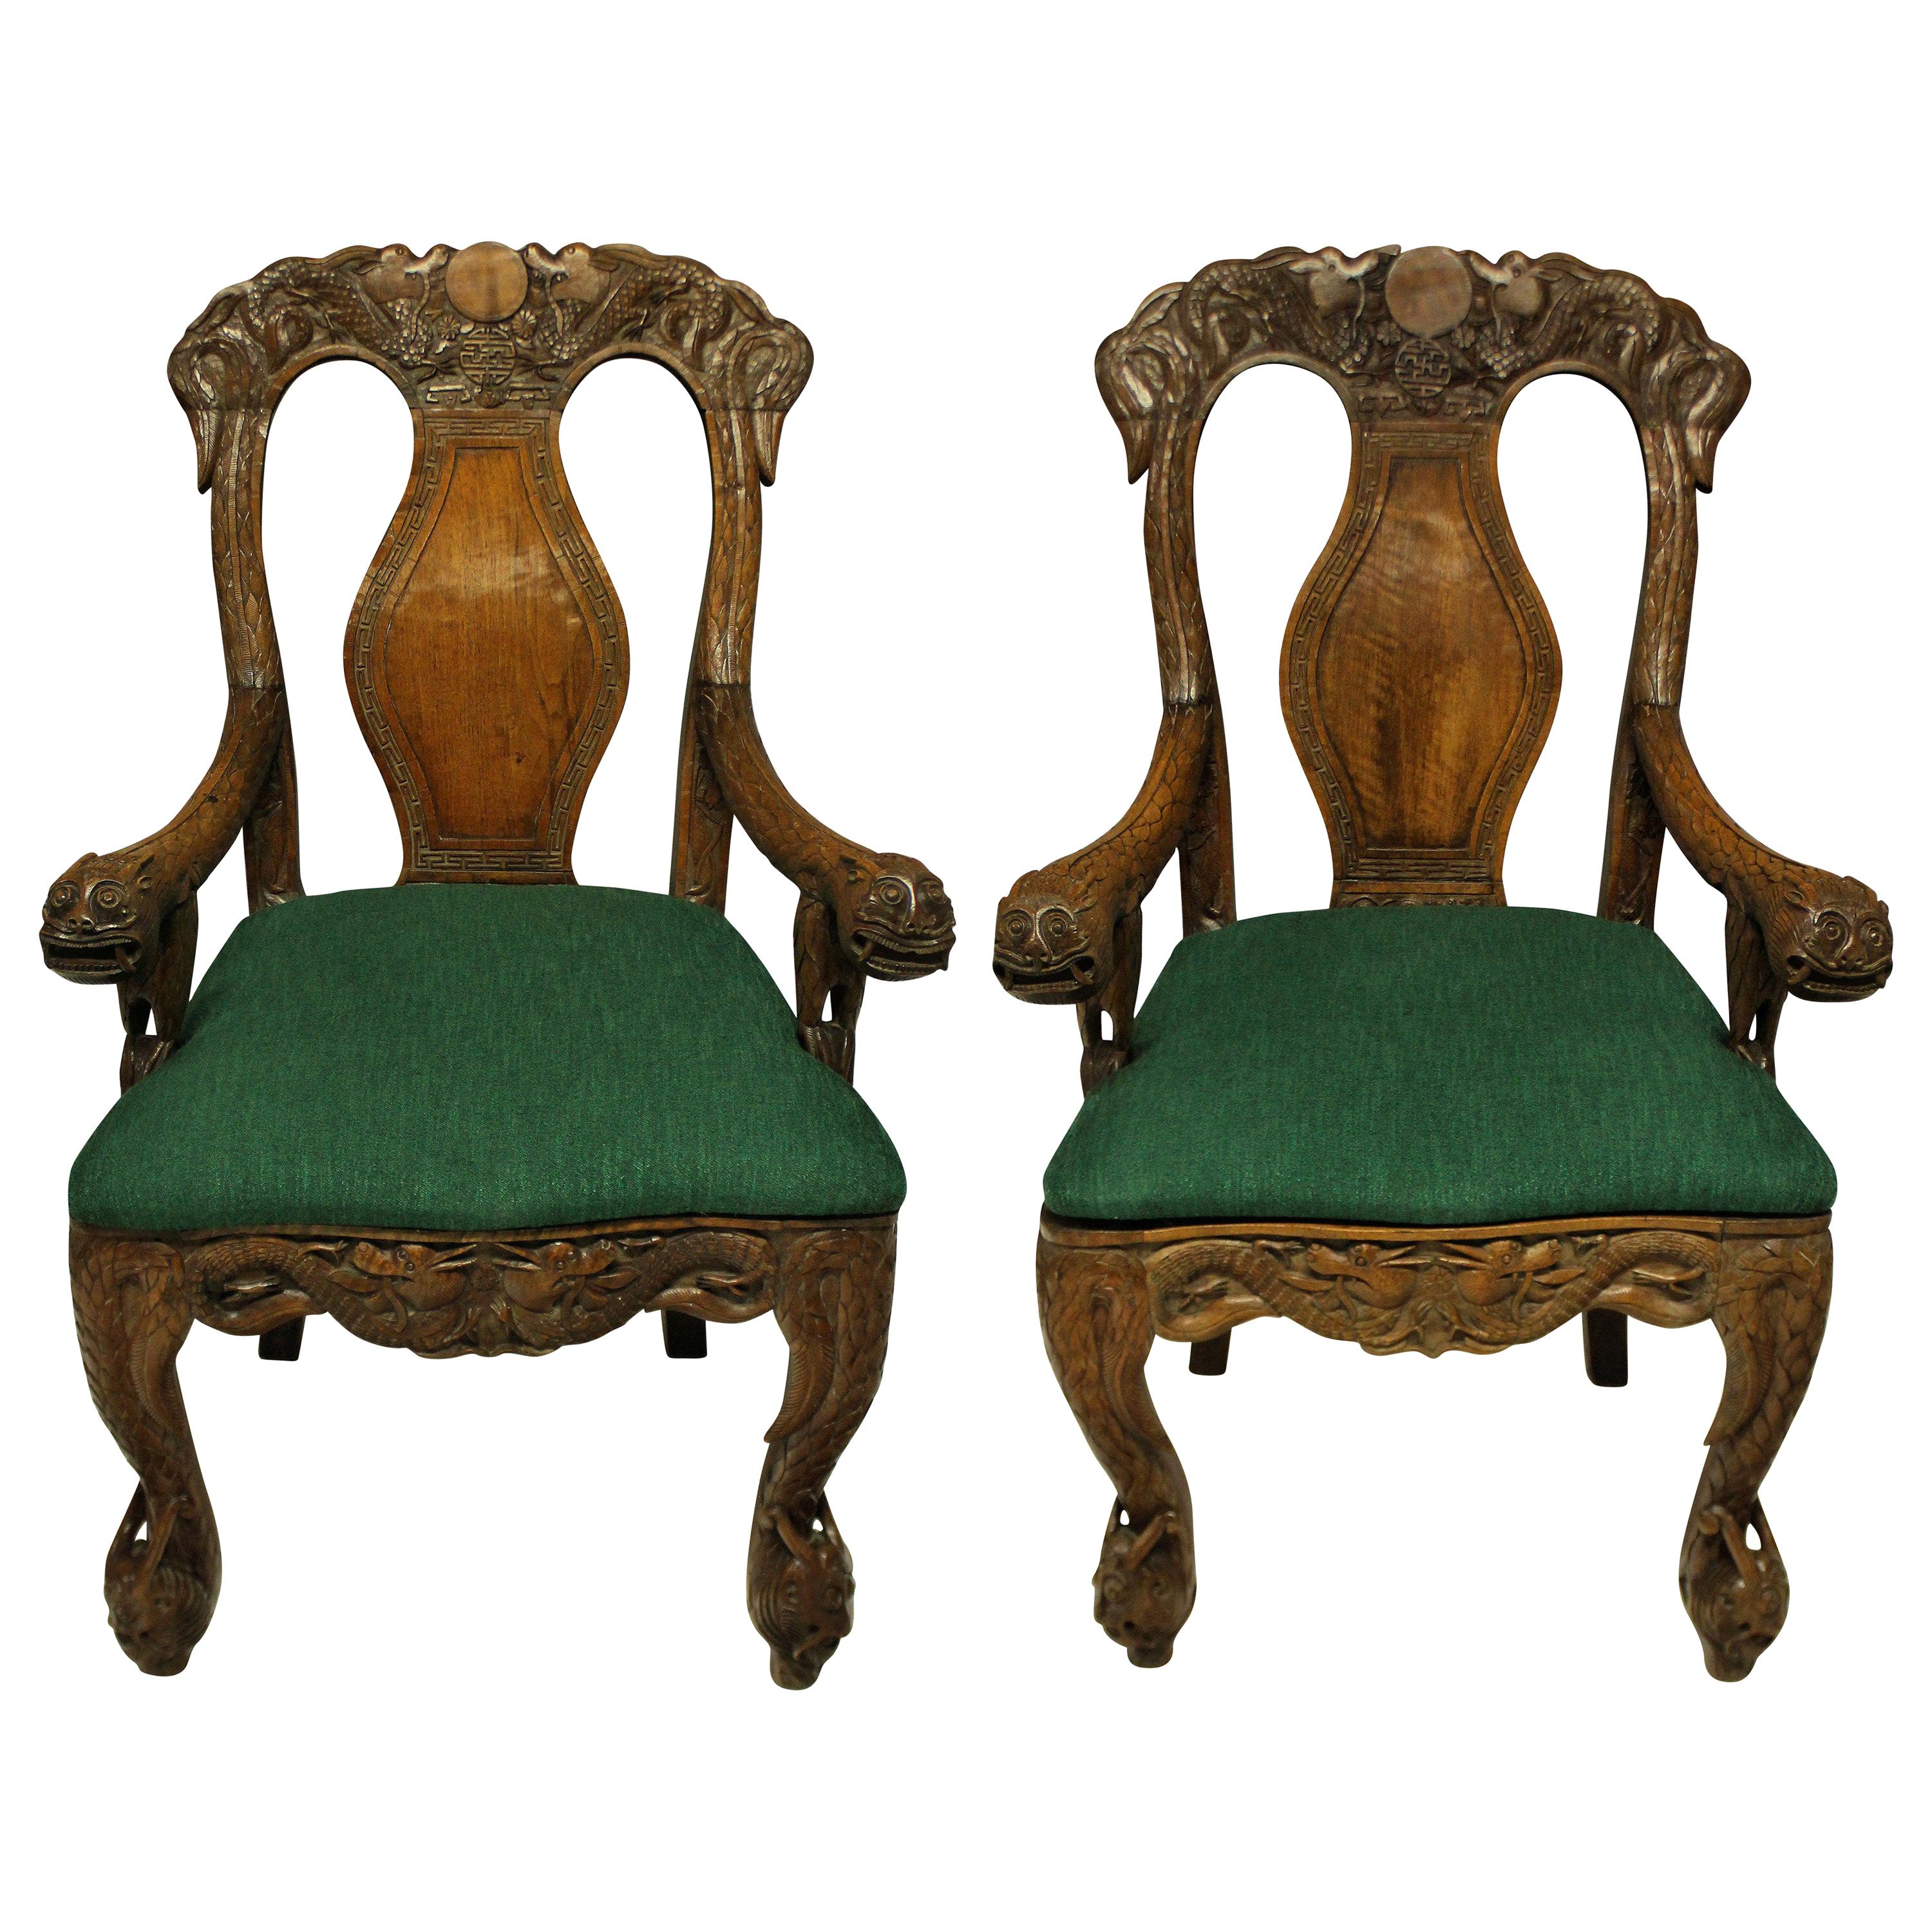 Pair of Finely Carved 19th Century Chinese Armchairs